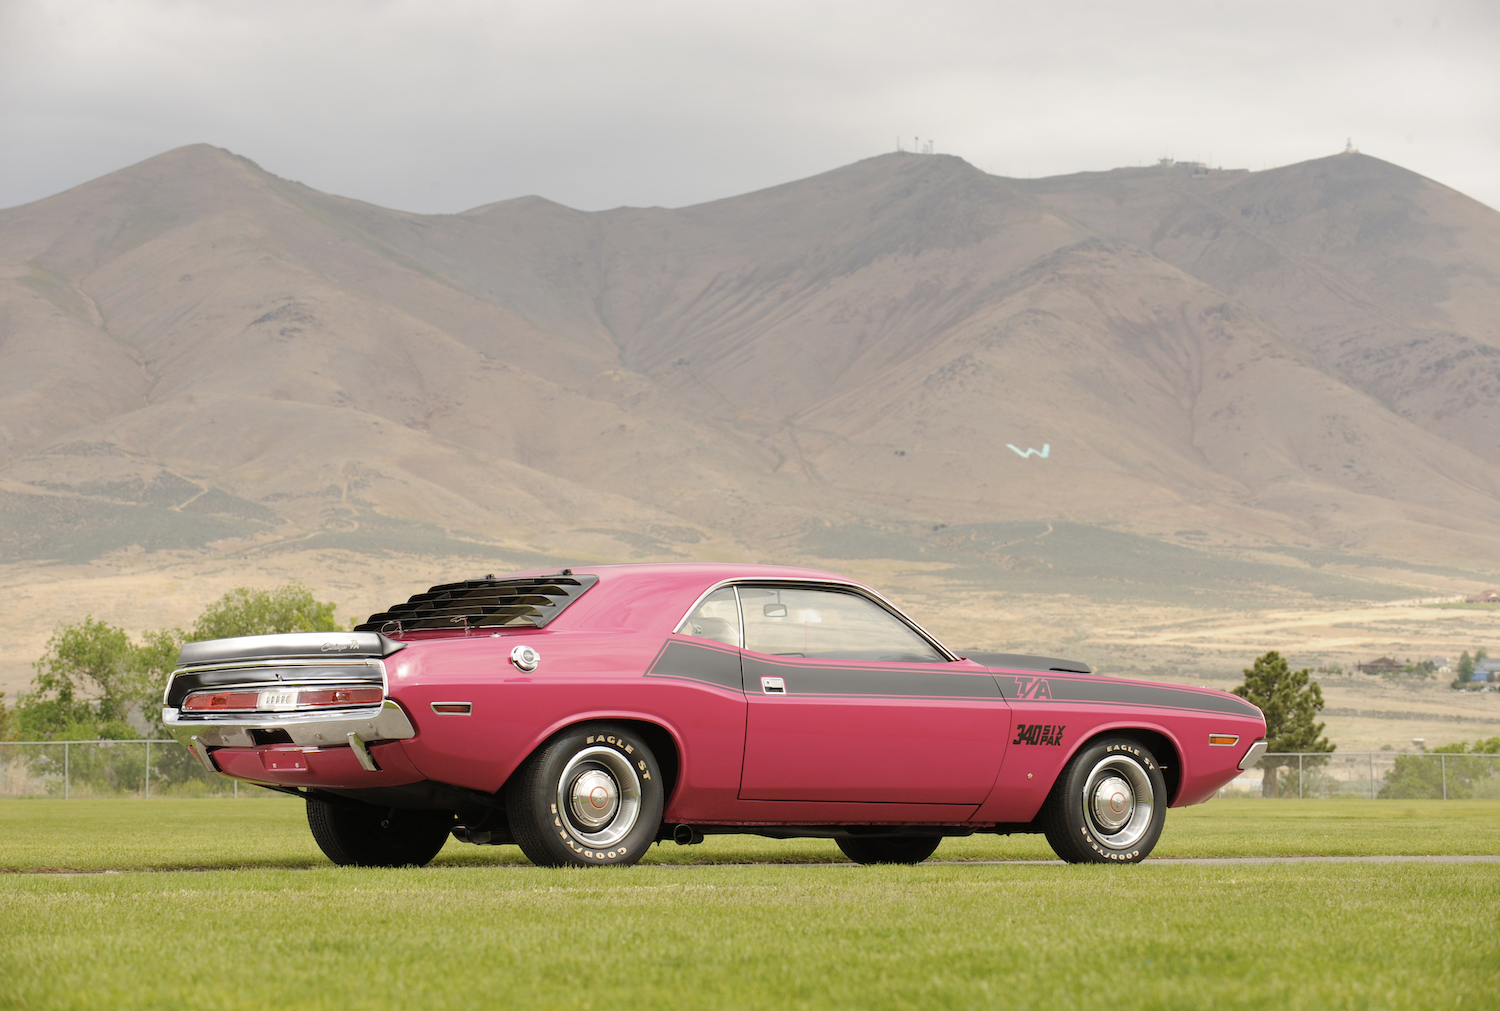 Reddish pink 1970 Dodge Challenger rare T/A Trans America trim parked in front of a mountain ridge.